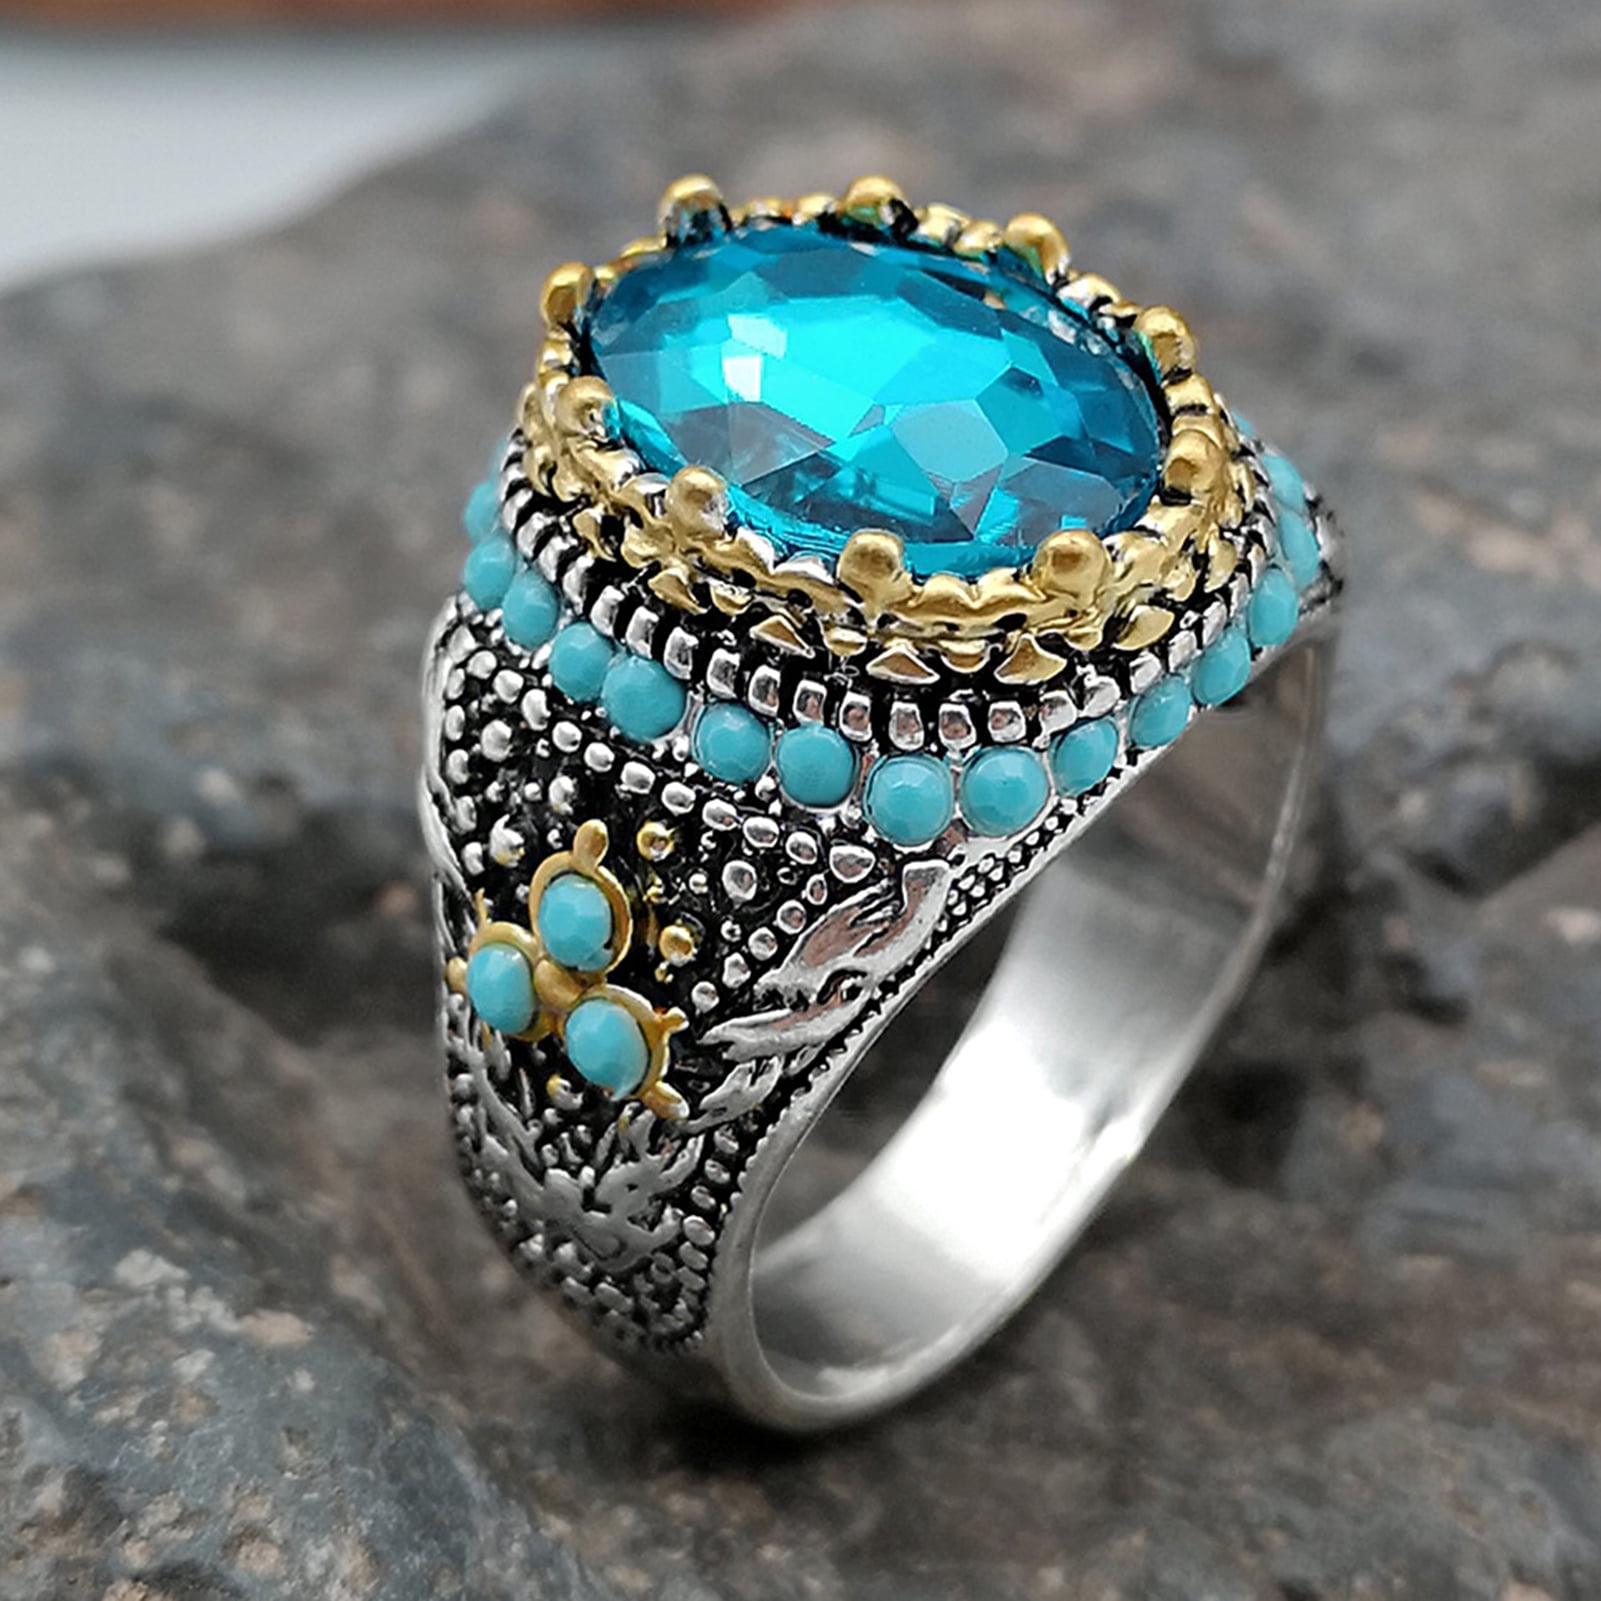 Persian Turquoise Ring - Persis Collection turquoise jewelry